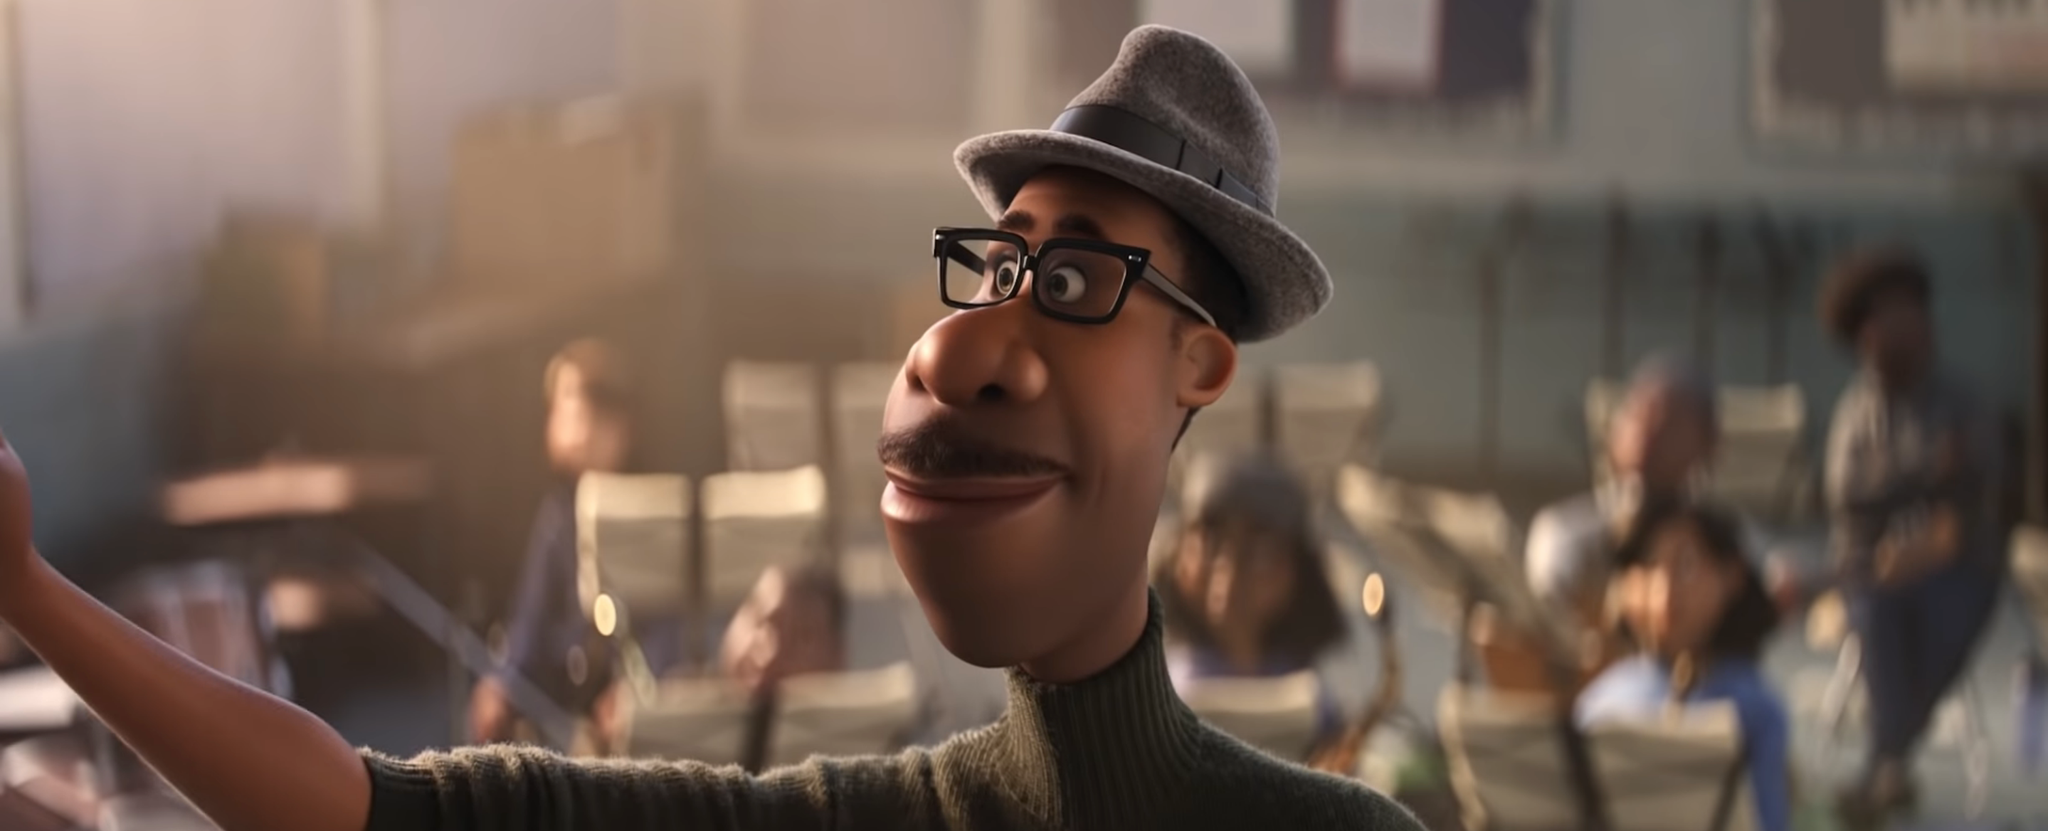 Will 'Soul' Put Pixar Back on Track? The Is Promising